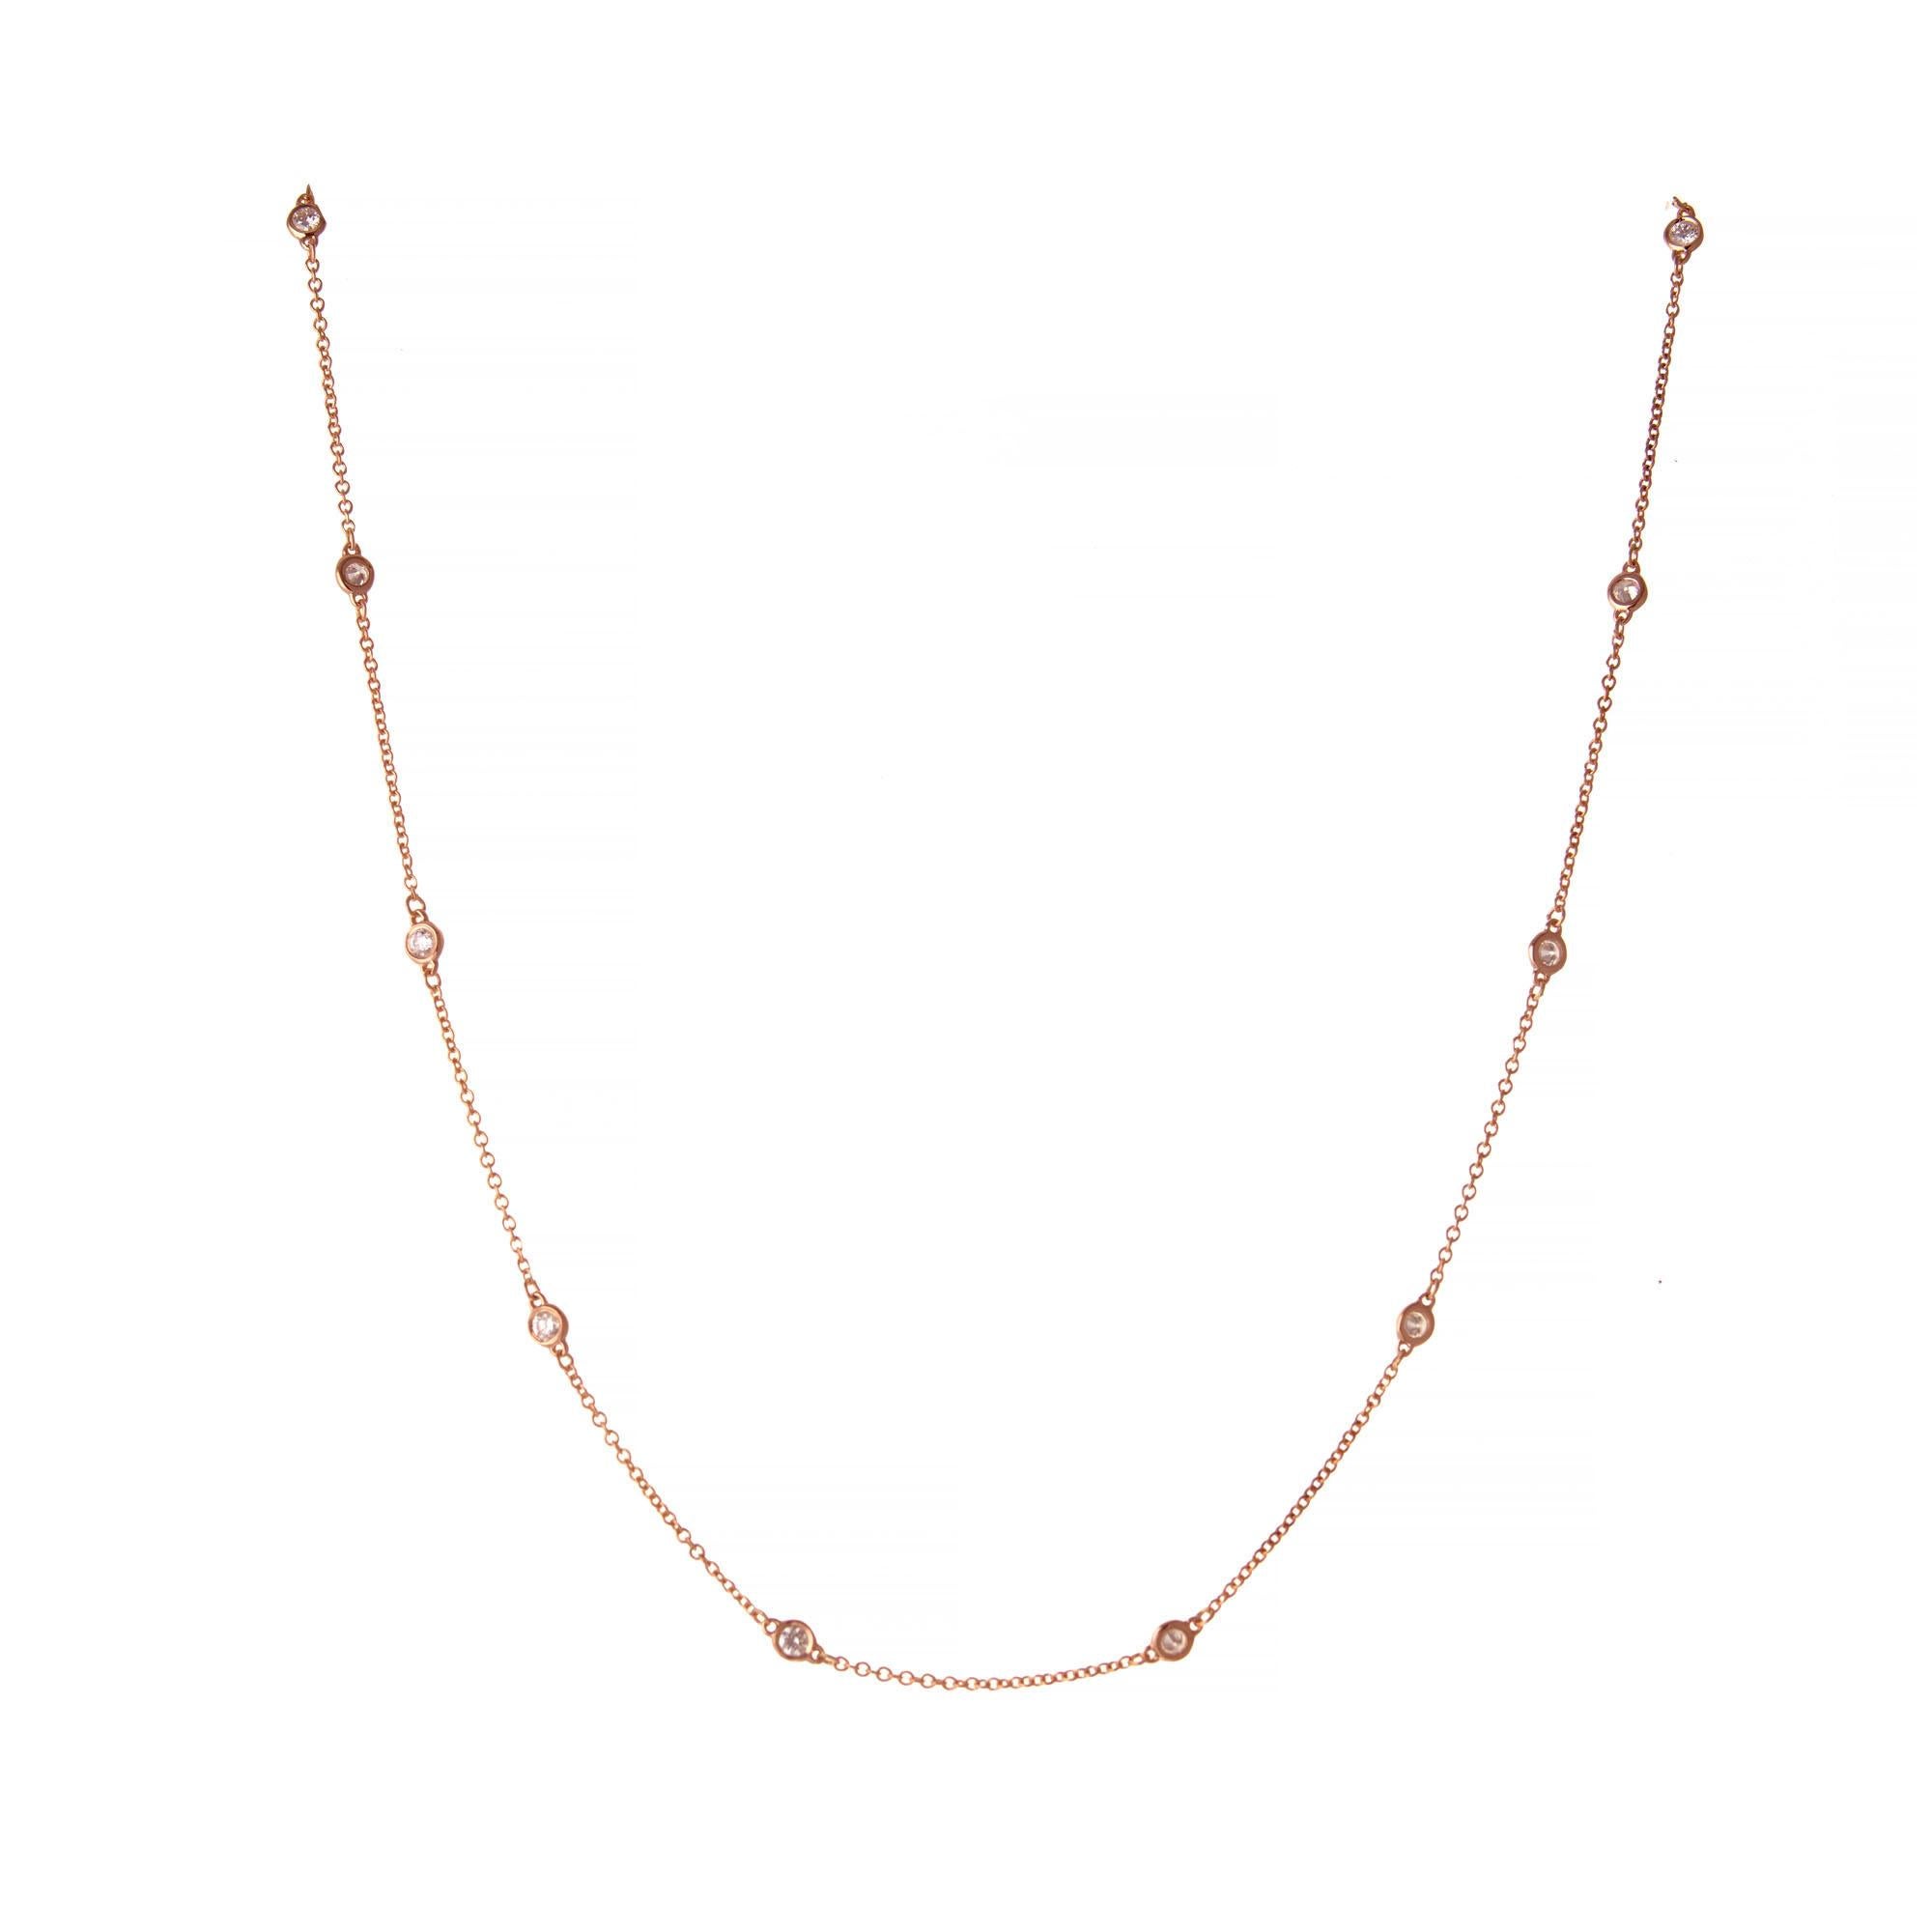 Round brilliant cut bezel set diamond by the yard 14k rose gold necklace.  16 inches.  

12 round brilliant cut diamonds I VS2-SI, approx. .66cts
14k rose gold 
Stamped: 585
2.4 grams
Chain: 16 Inches
